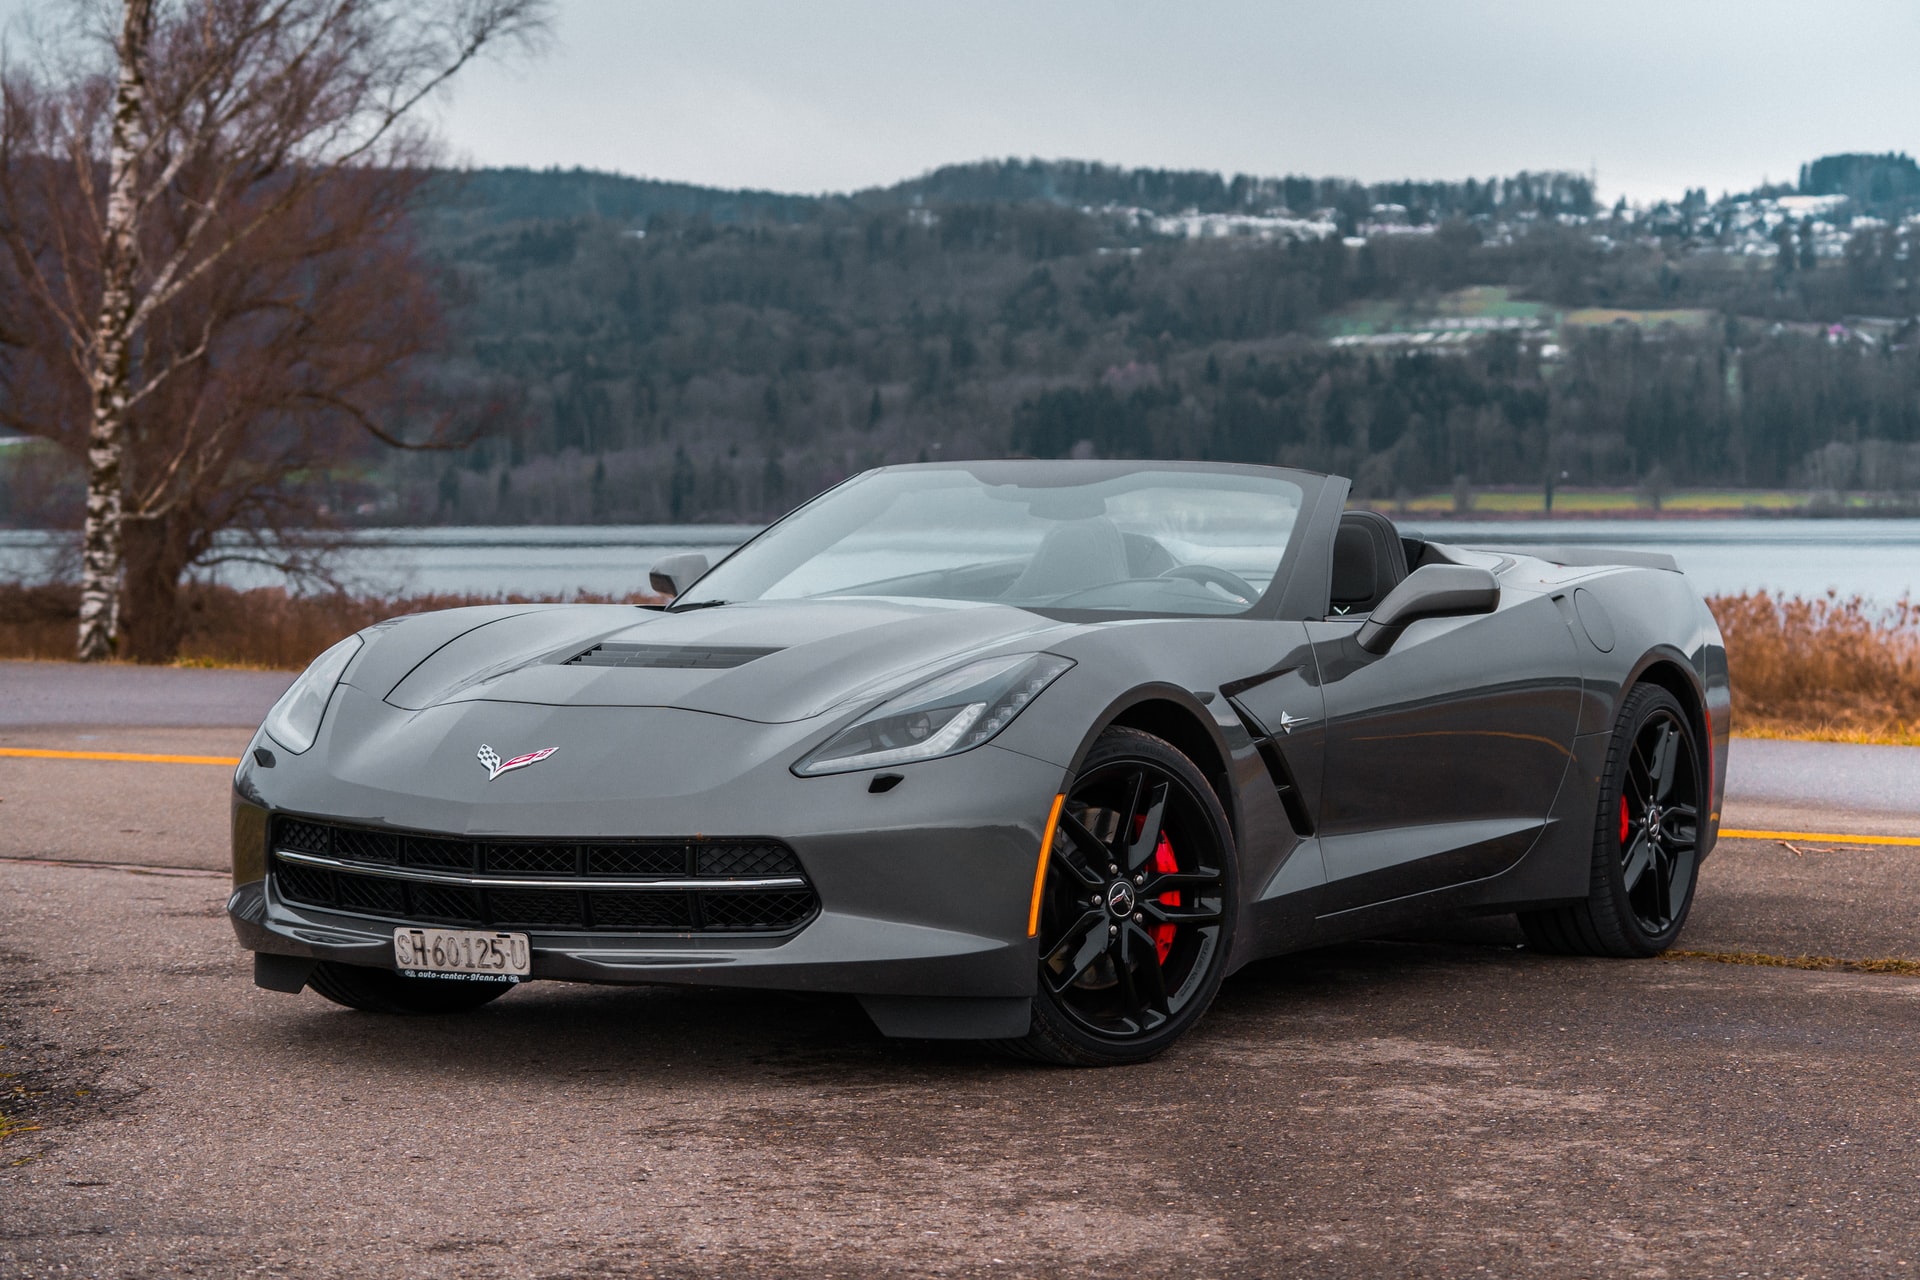 GM announced an electrified version of Chevy Corvette next year